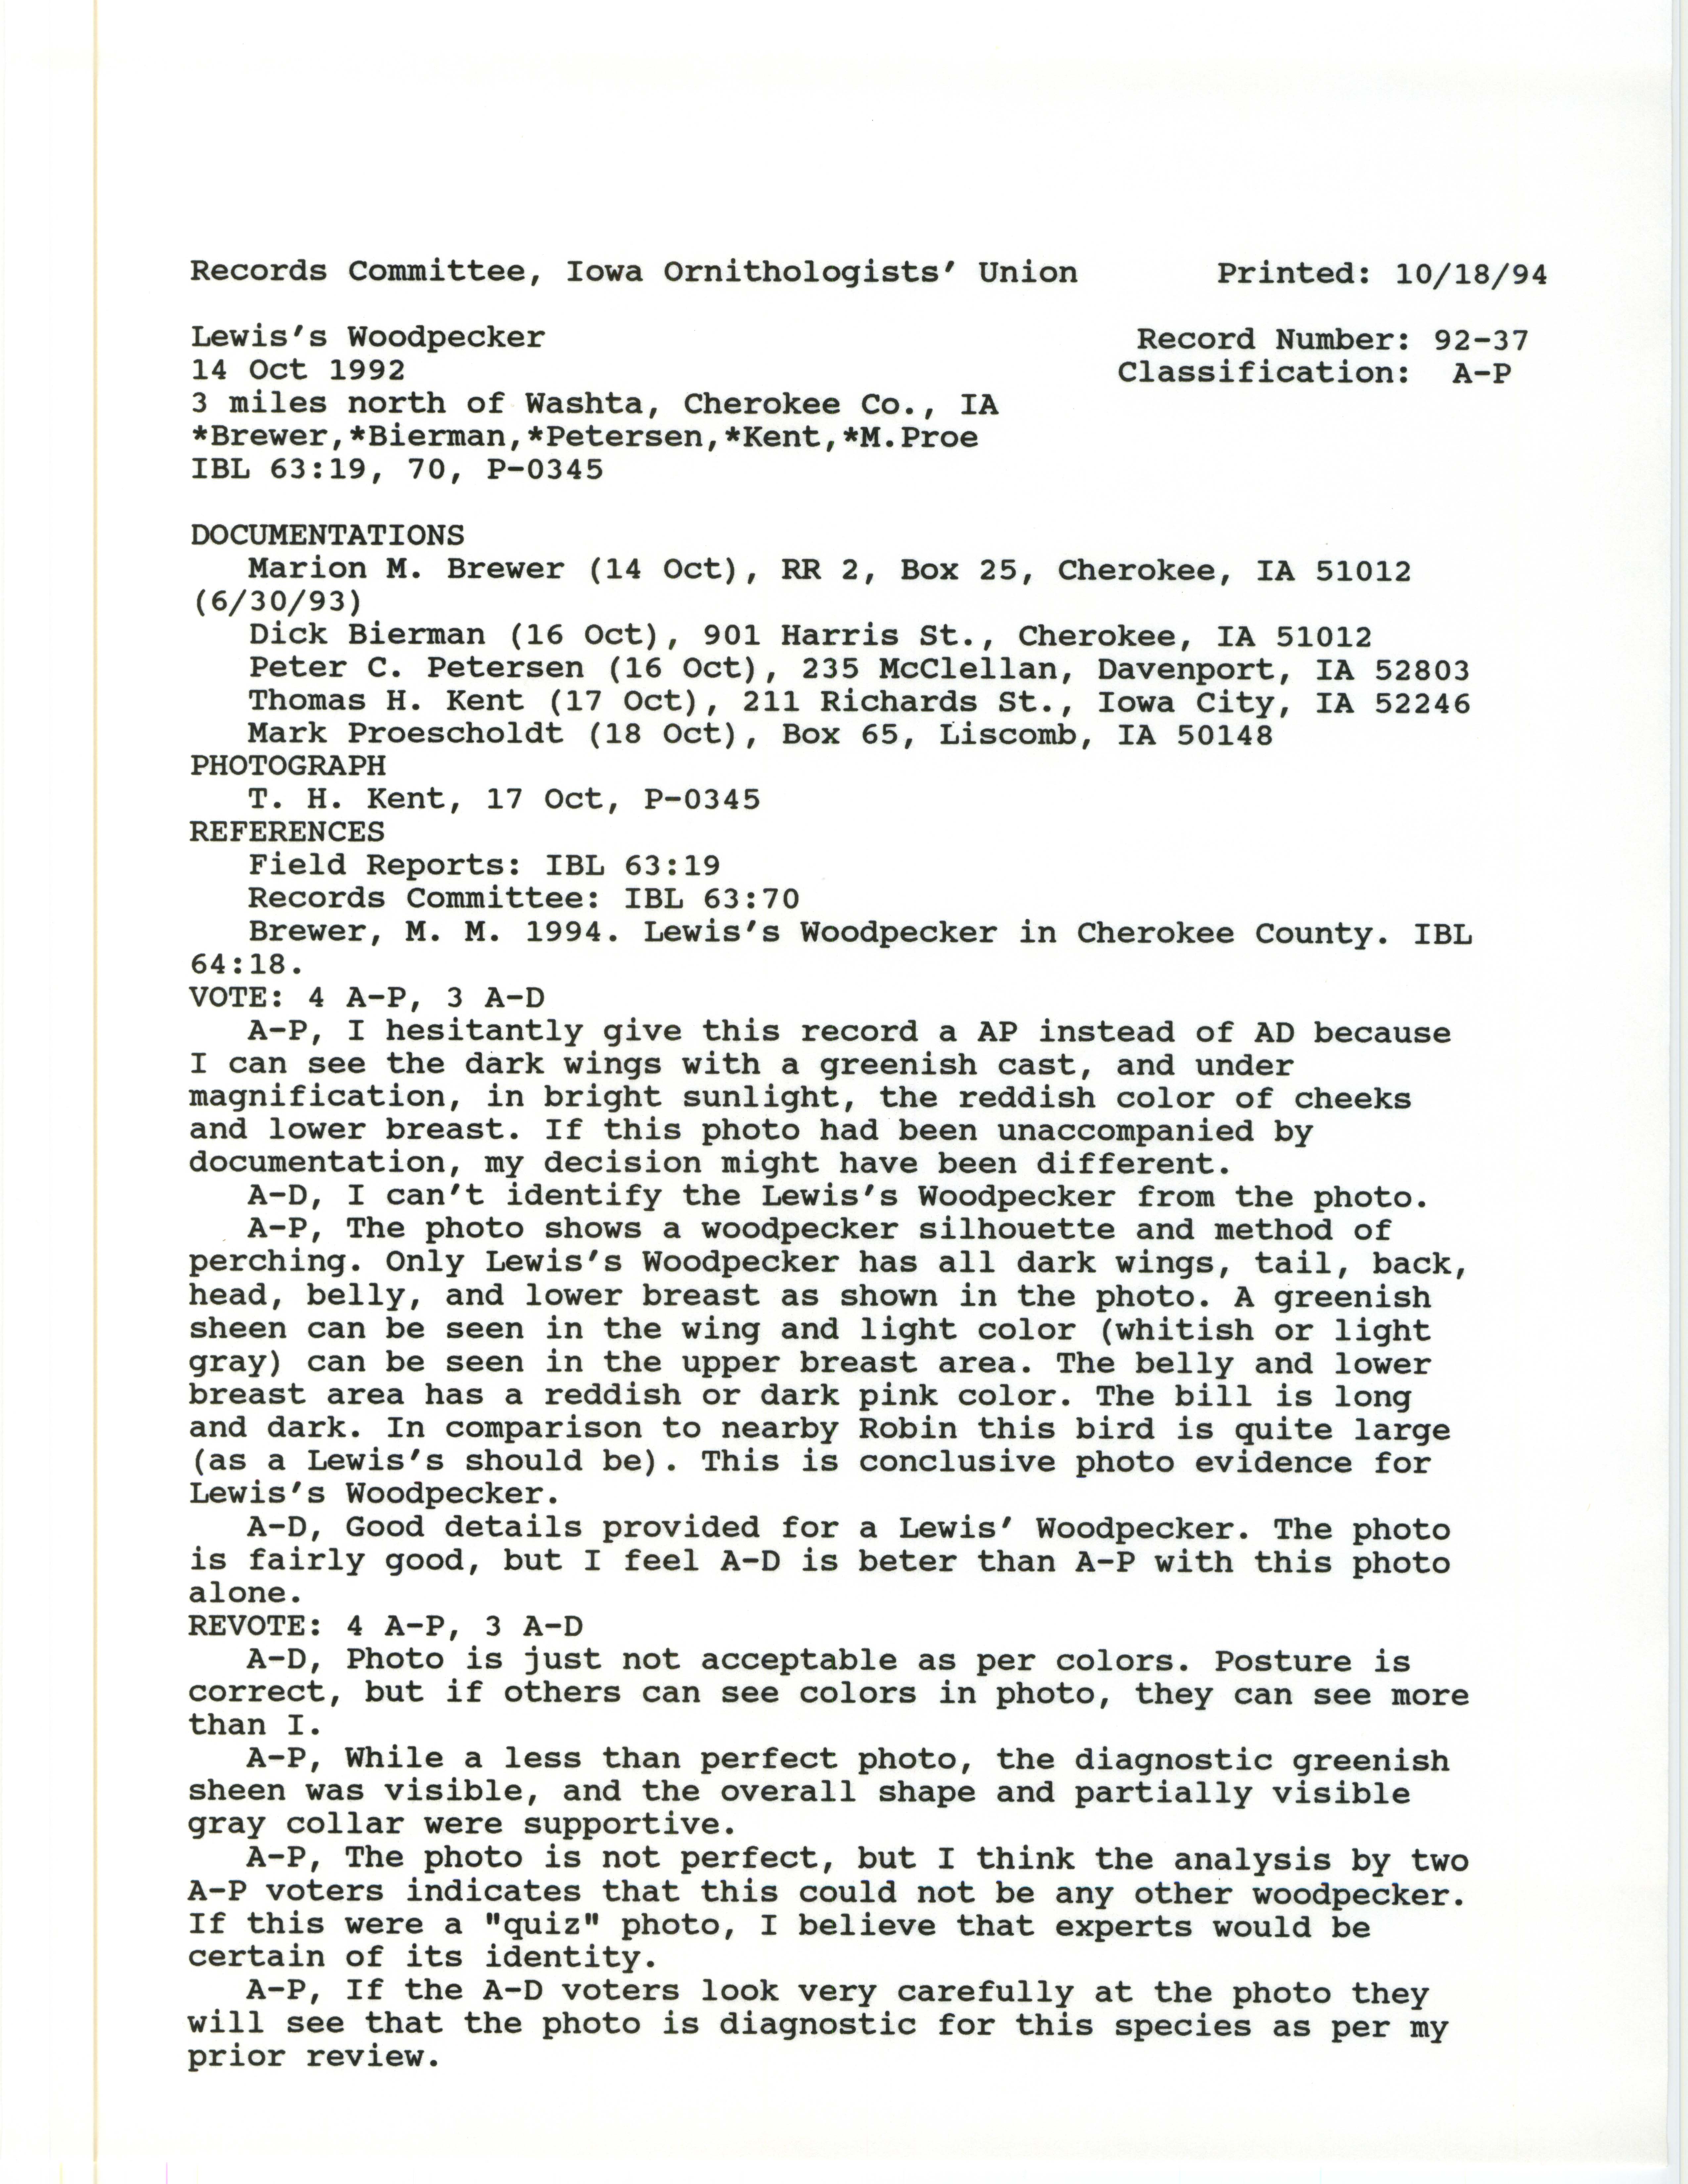 Records Committee review for rare bird sighting for Lewis's Woodpecker north of Washta, 1992